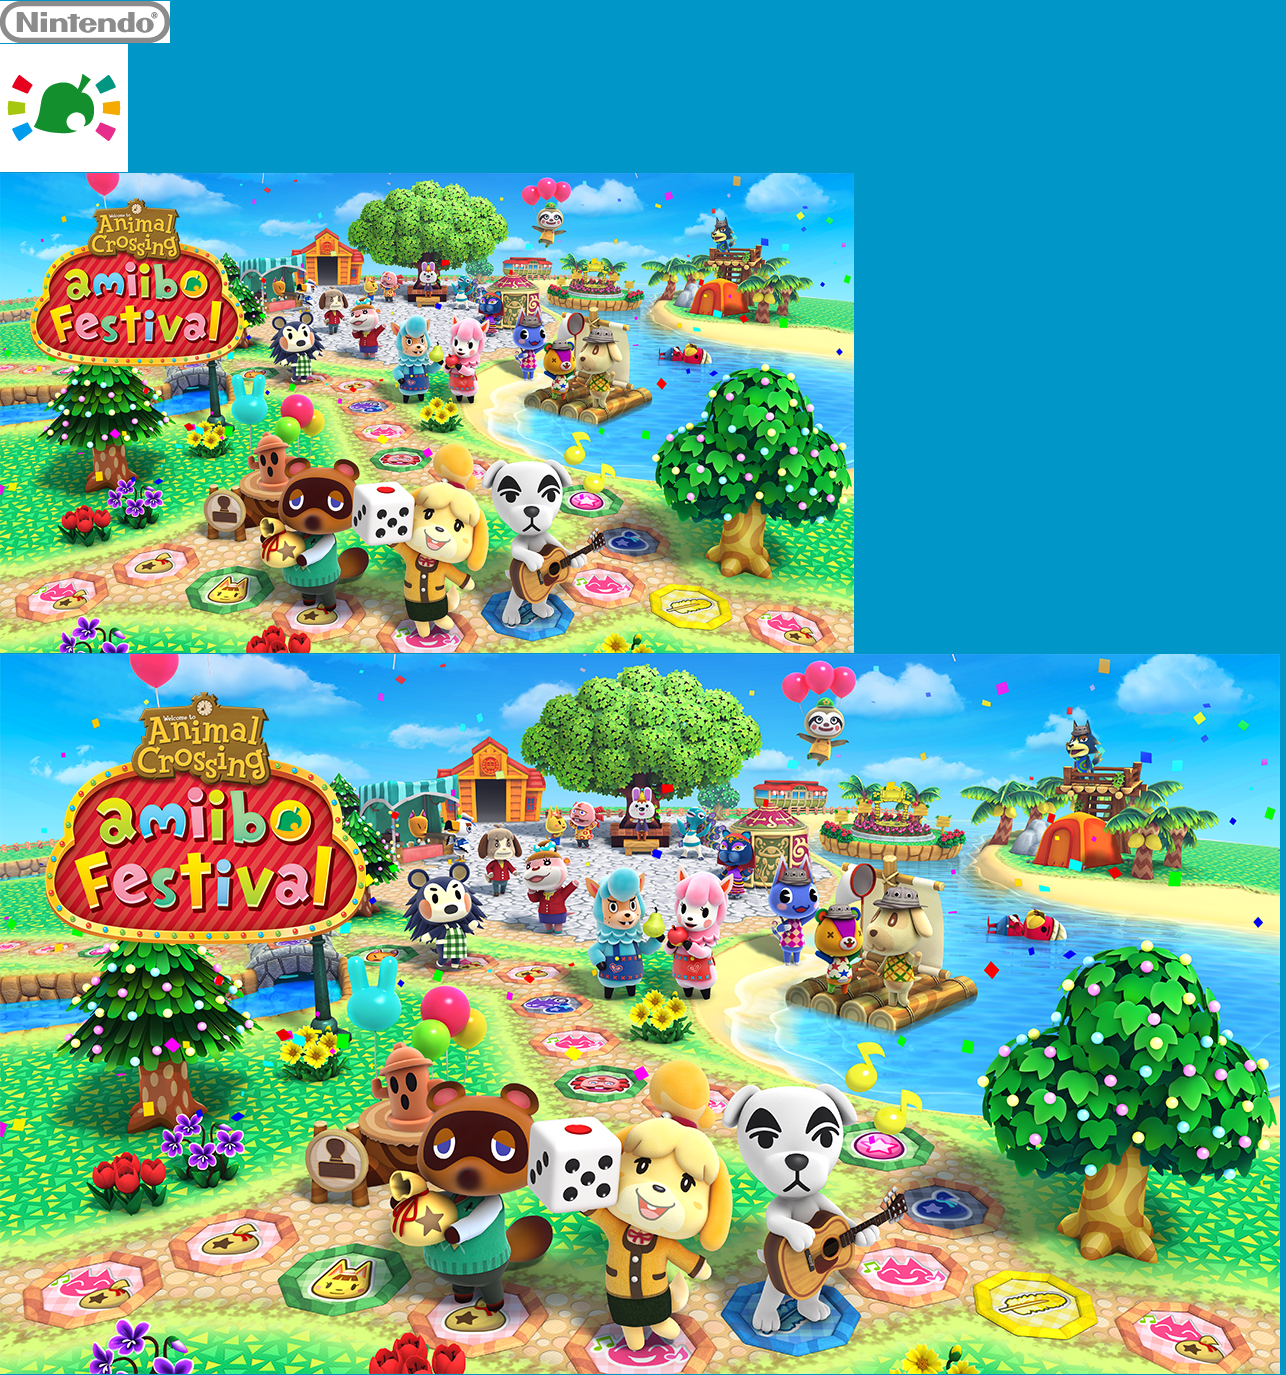 Animal Crossing: amiibo Festival - HOME Menu Icon and Banners